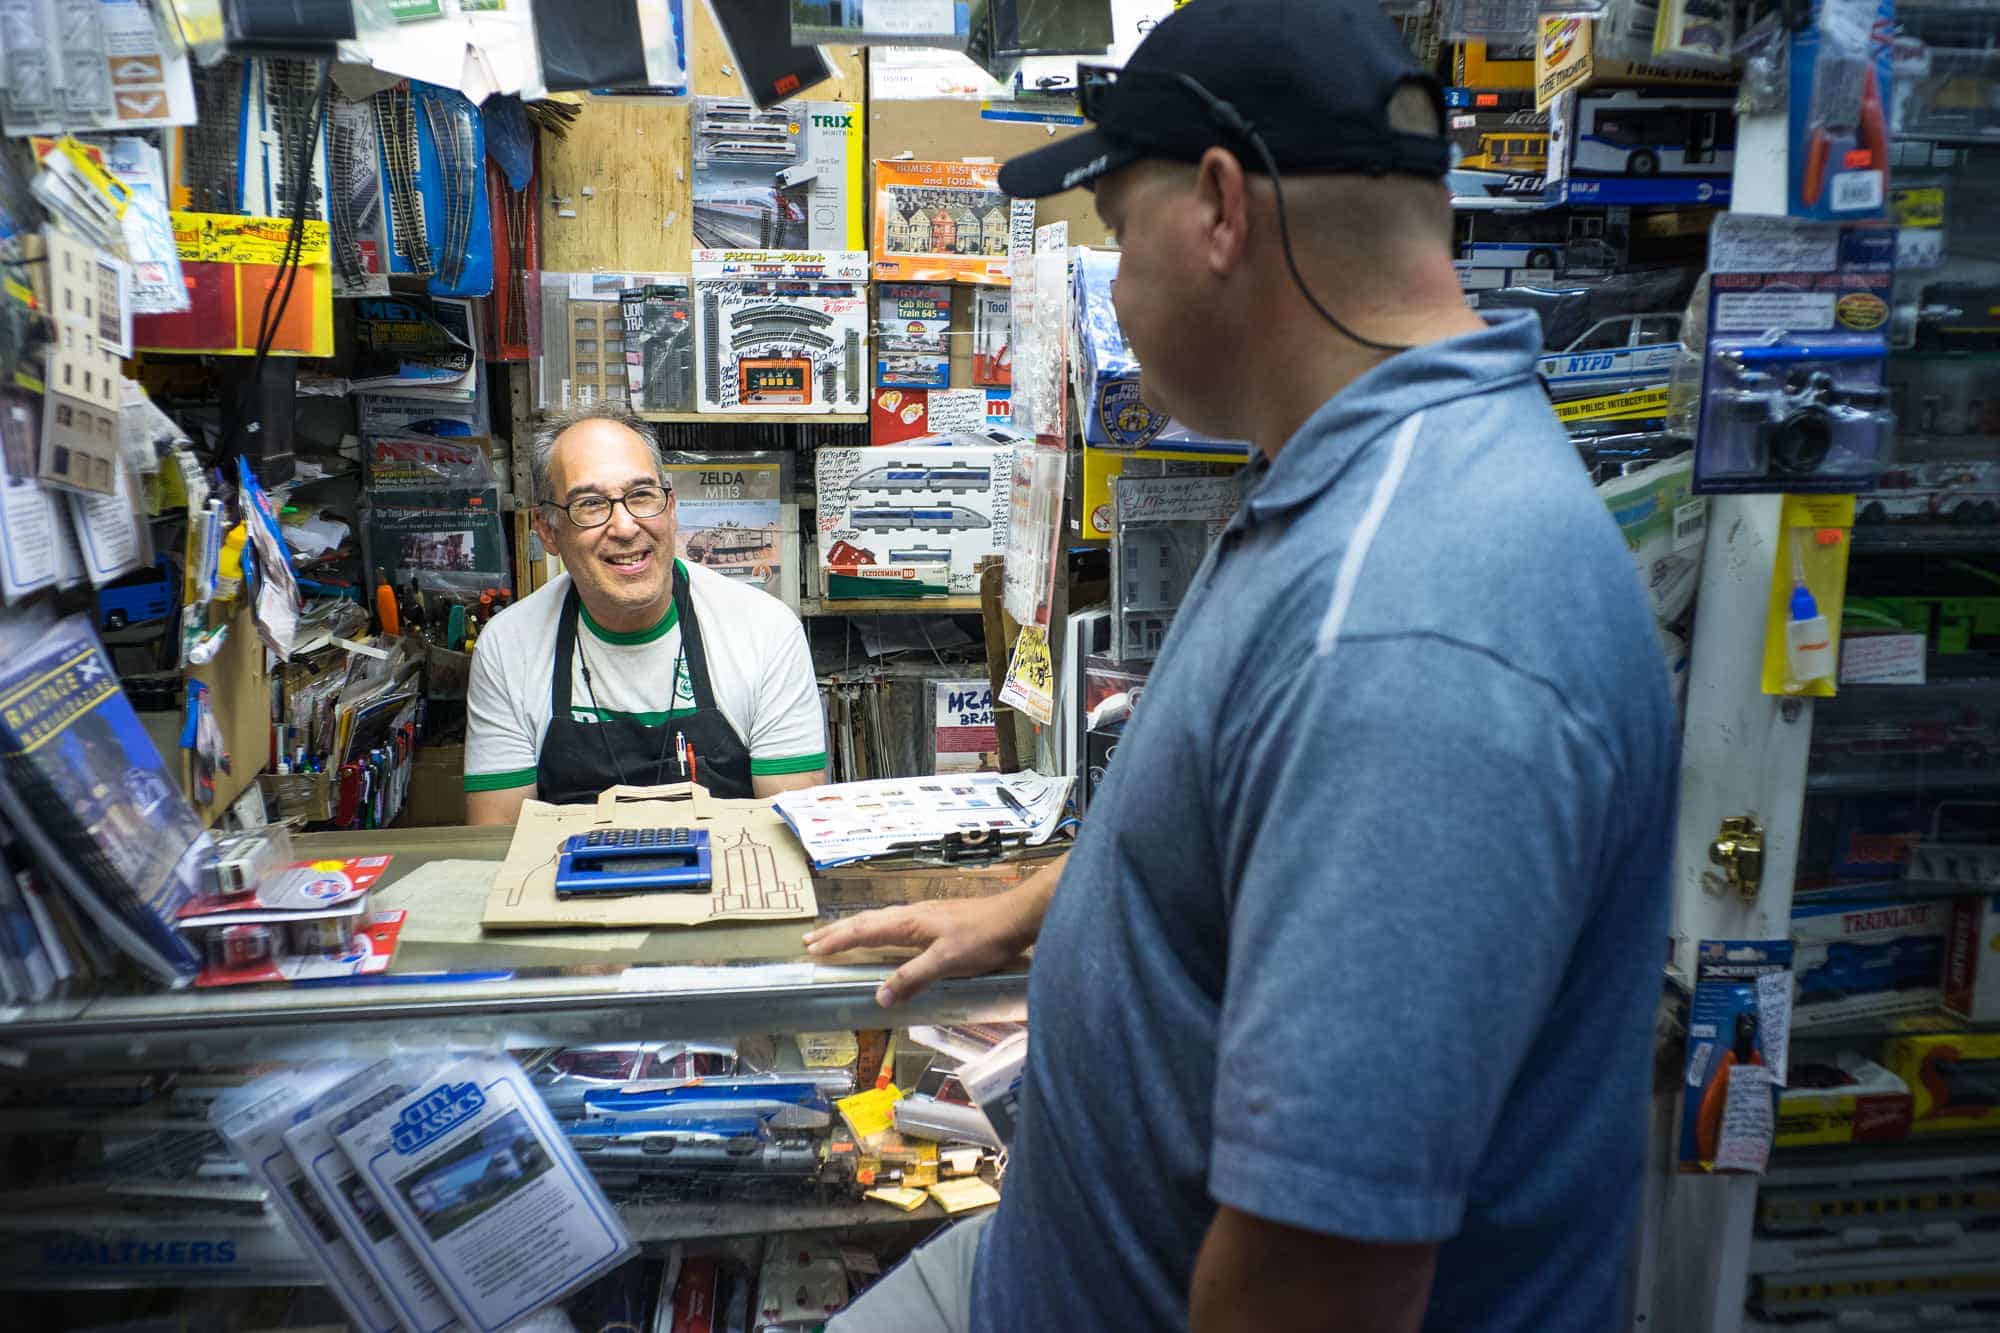 The owner of the Red Caboose Hobby Shop speaks with a customer.